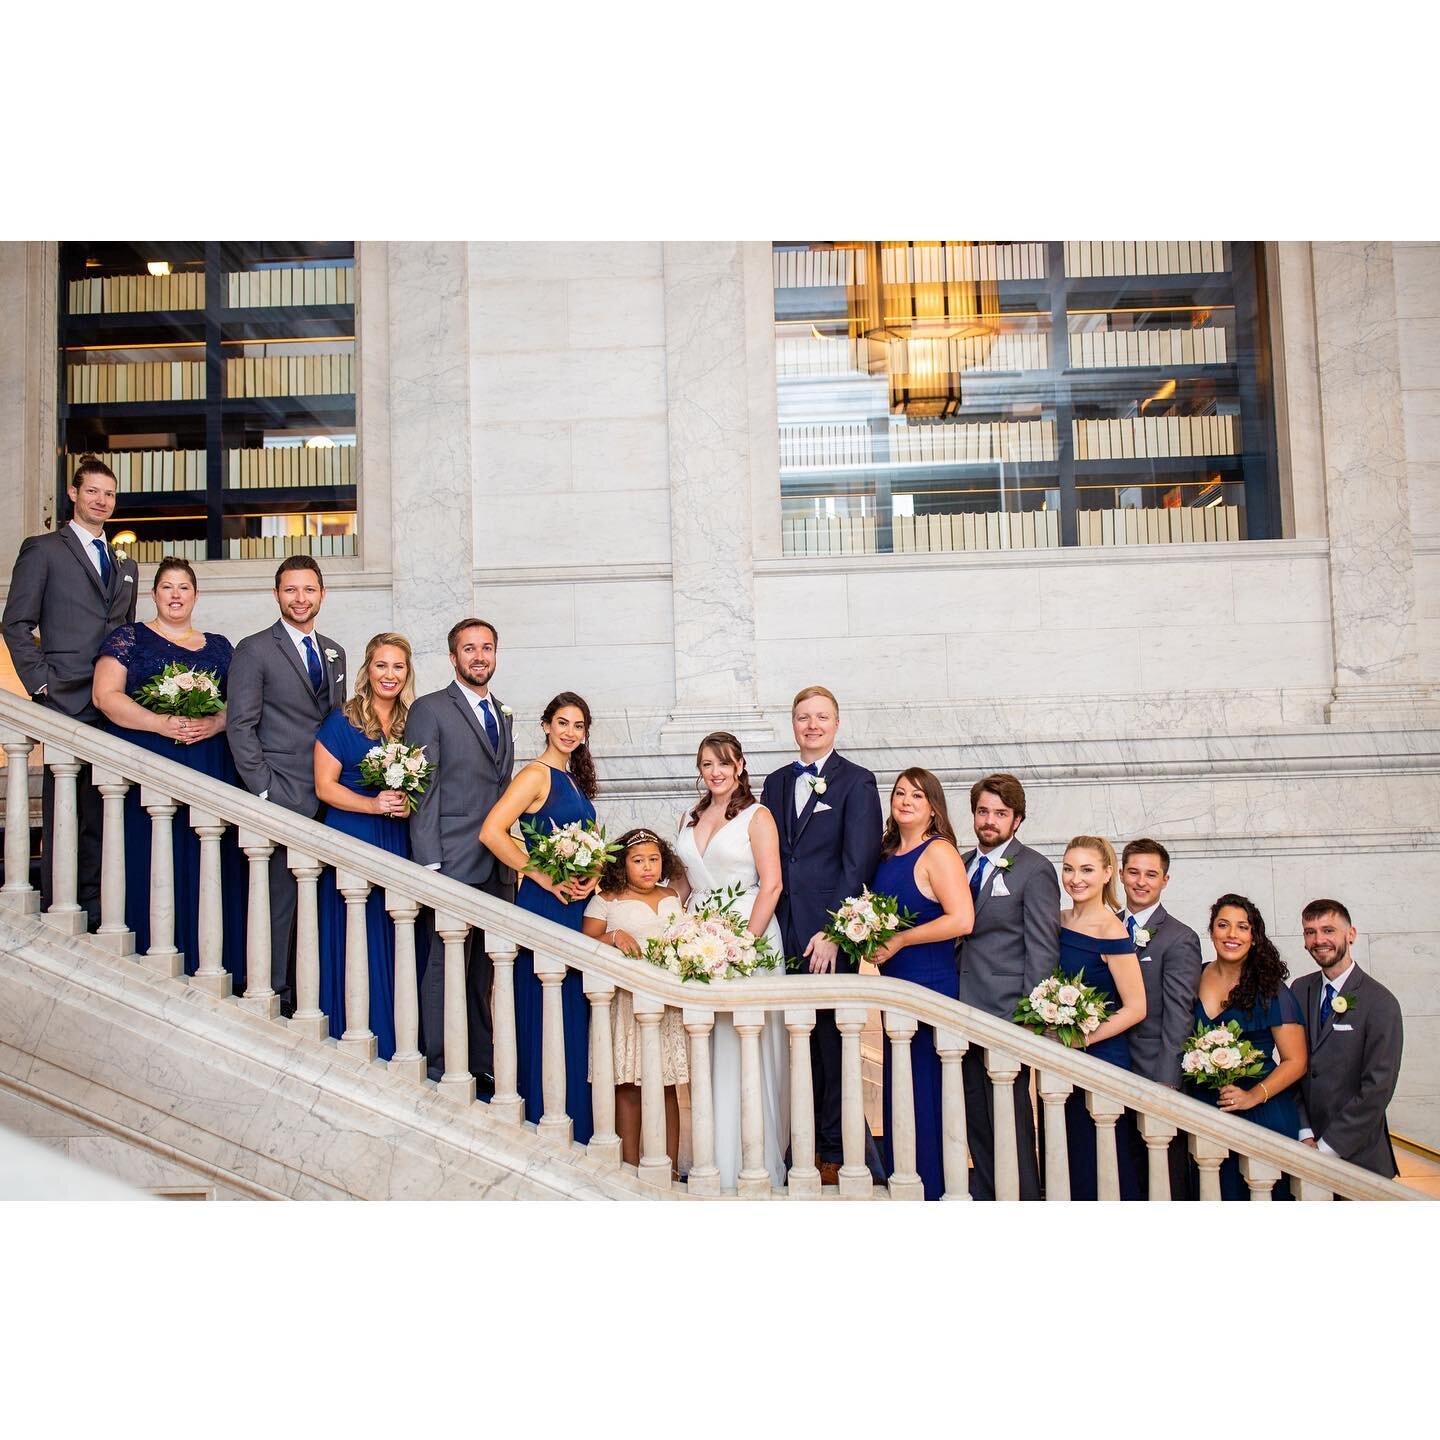 Group shot on the grand staircase. .
.
Hotel: @thegraychi 
Catering: @dabsolute_events 
Florals: @stevesflowermarket 
Decor: @art_imagination 
Cake: @chicagocustomcakes 
Coffee: @onthegojocoffee 
Linens: @fslinens 
Farm Tables: @chgofarmtables
Photog